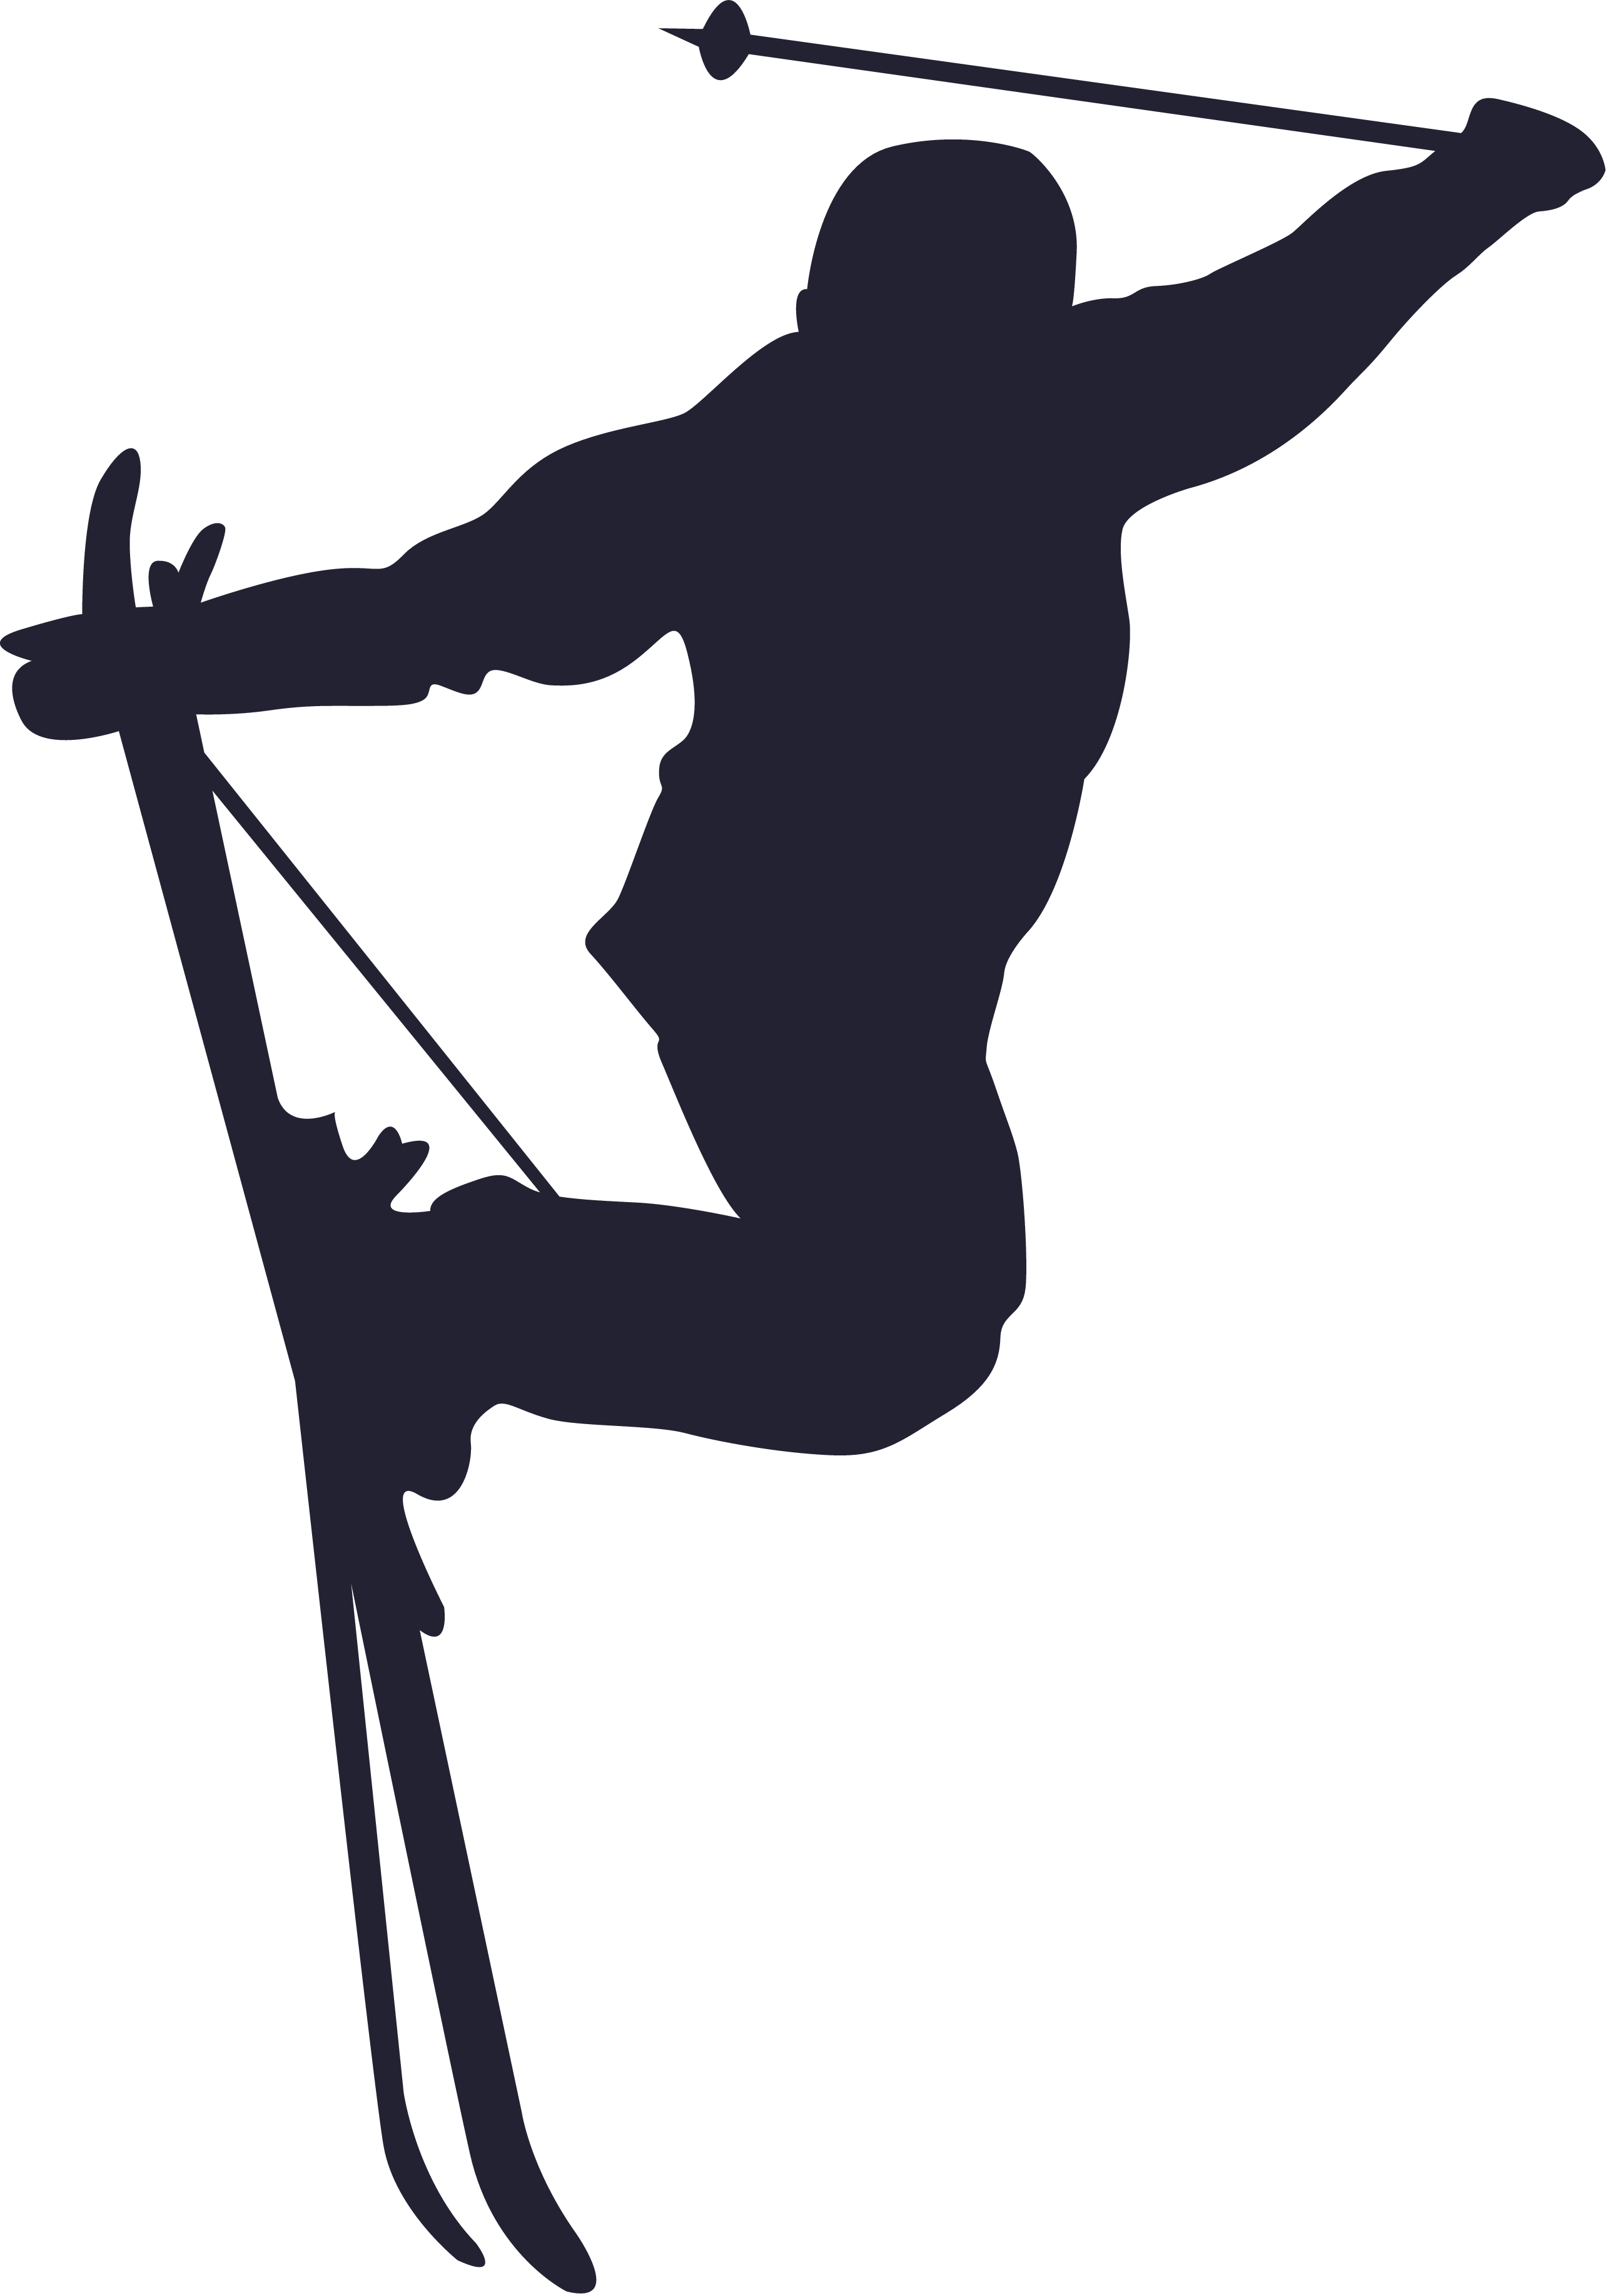 The Best Free Ski Silhouette Images Download From Free Silhouettes Of Ski At Getdrawings